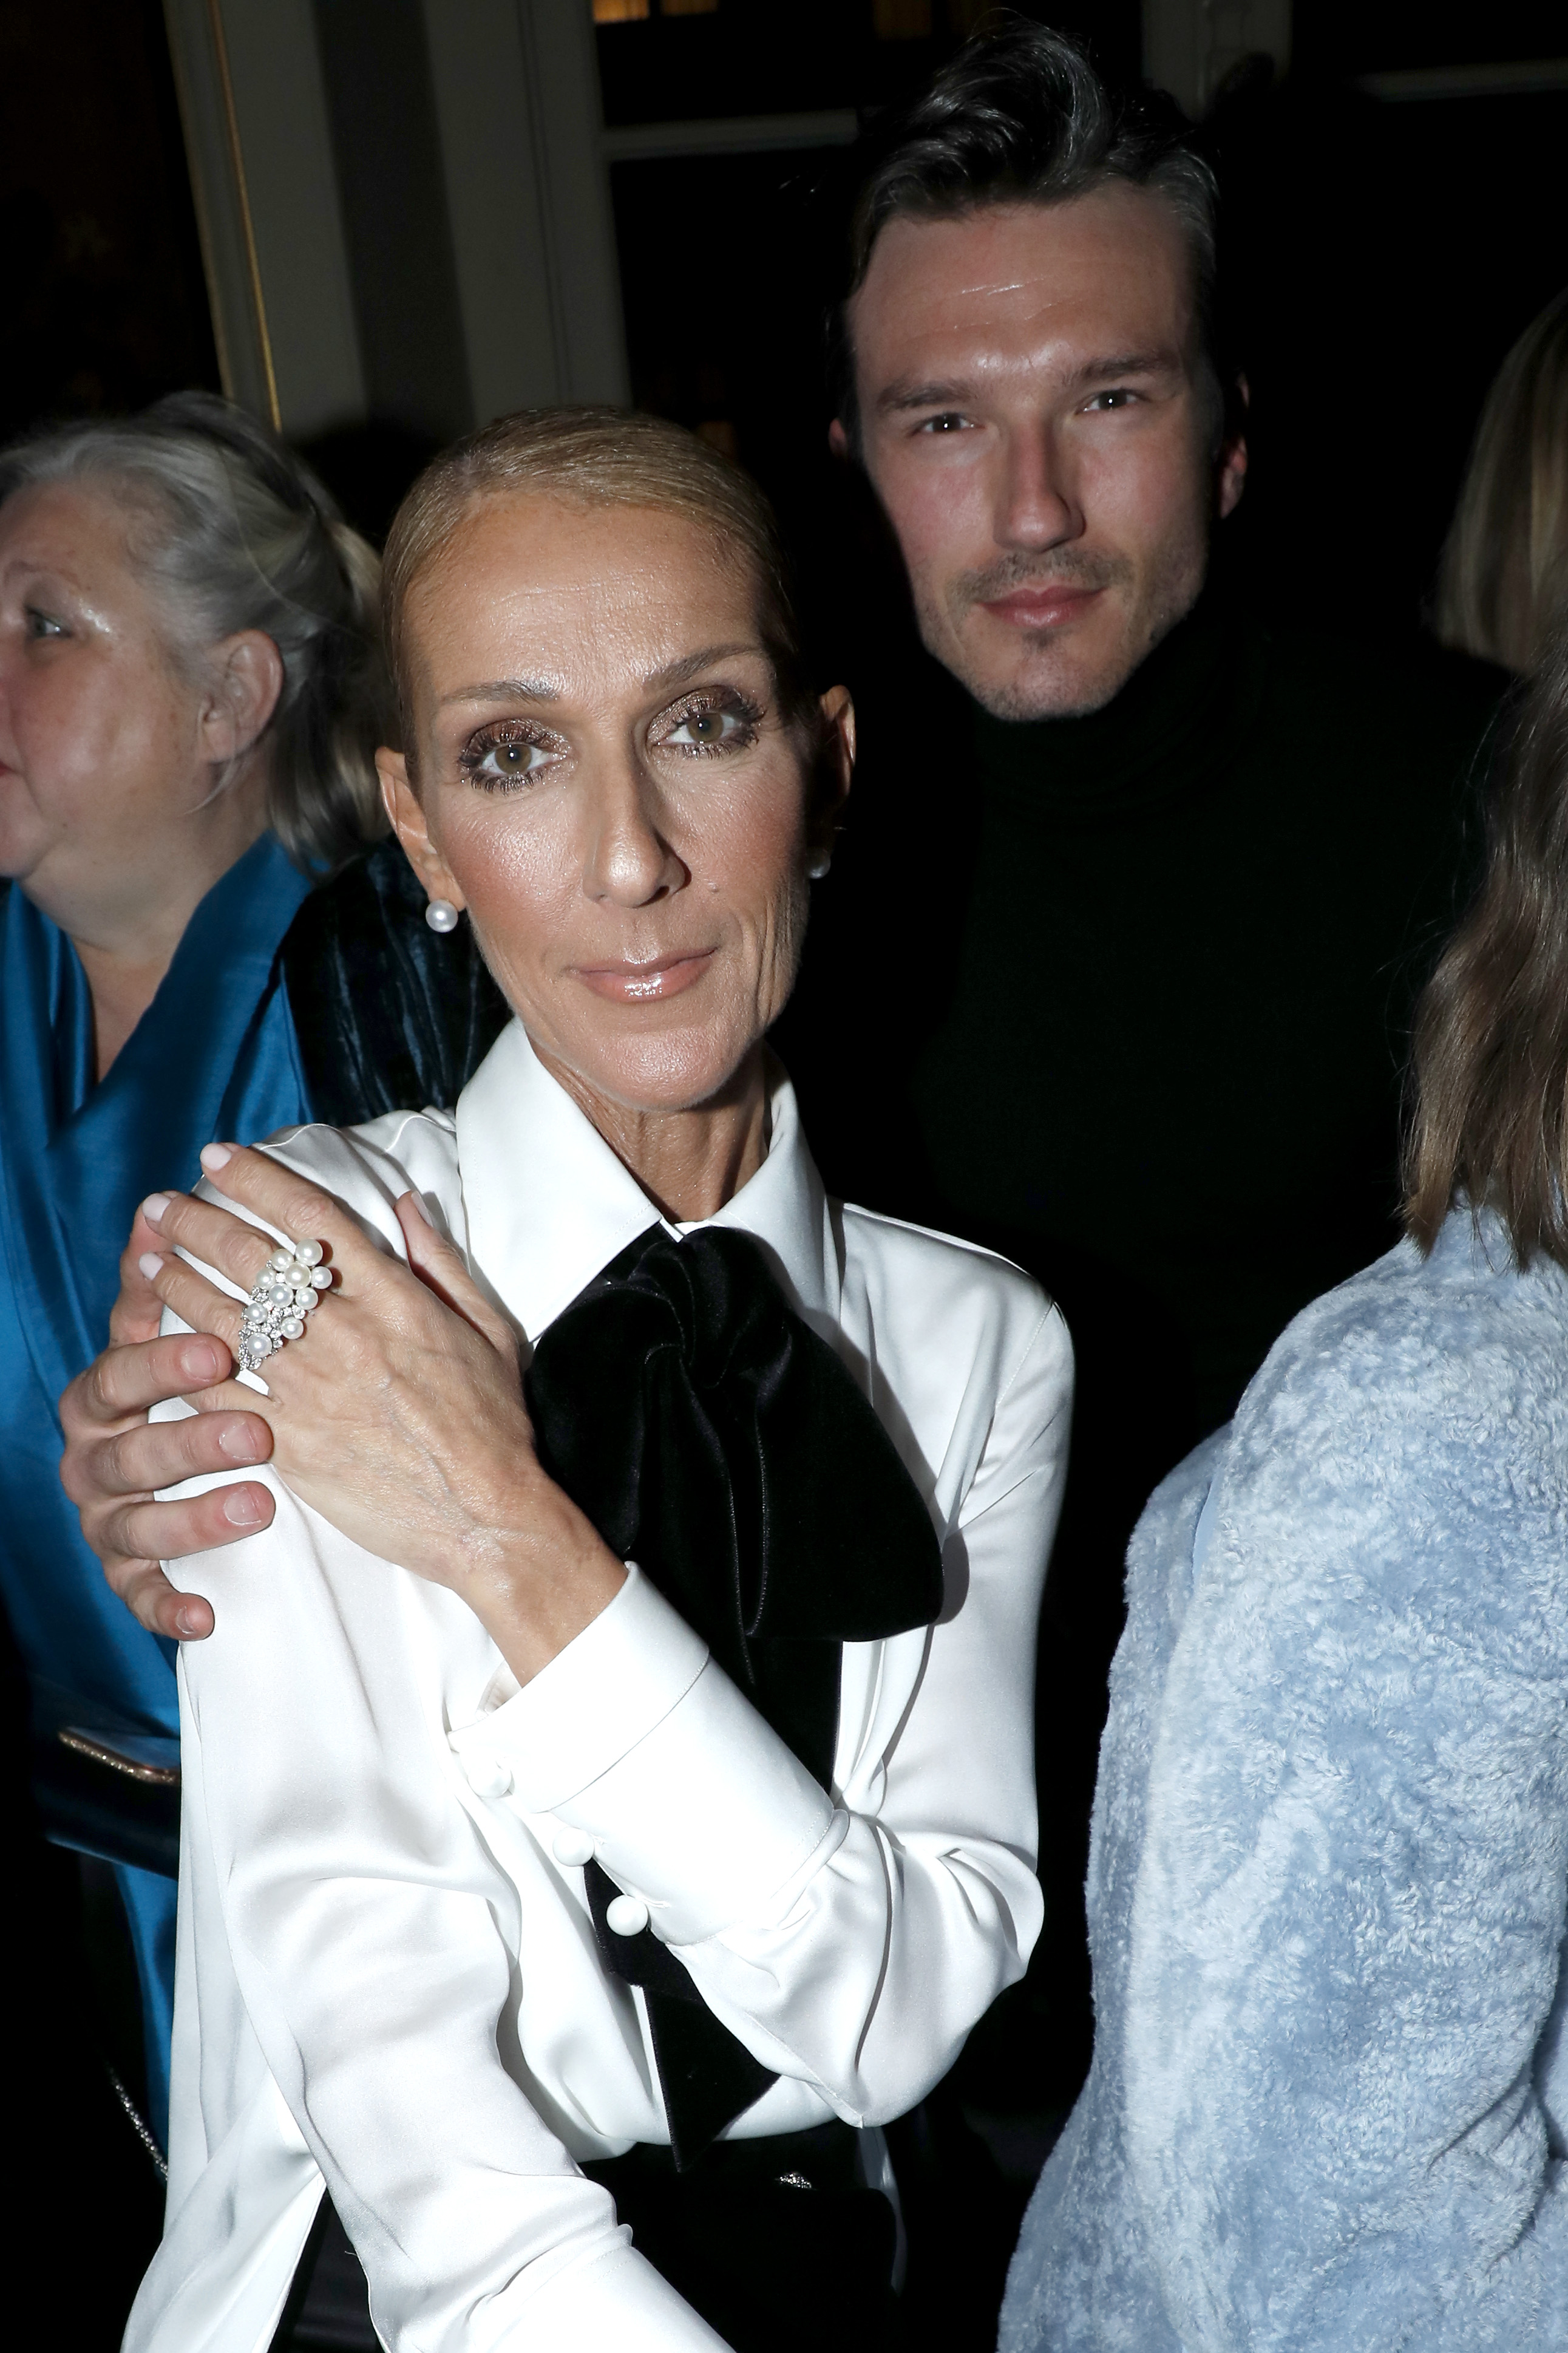 Celine Dion and Pepe Munoz at the Giorgio Armani Prive Haute Couture Spring Summer 2019 show on January 22, 2019 in Paris, France. | Source: Getty Images